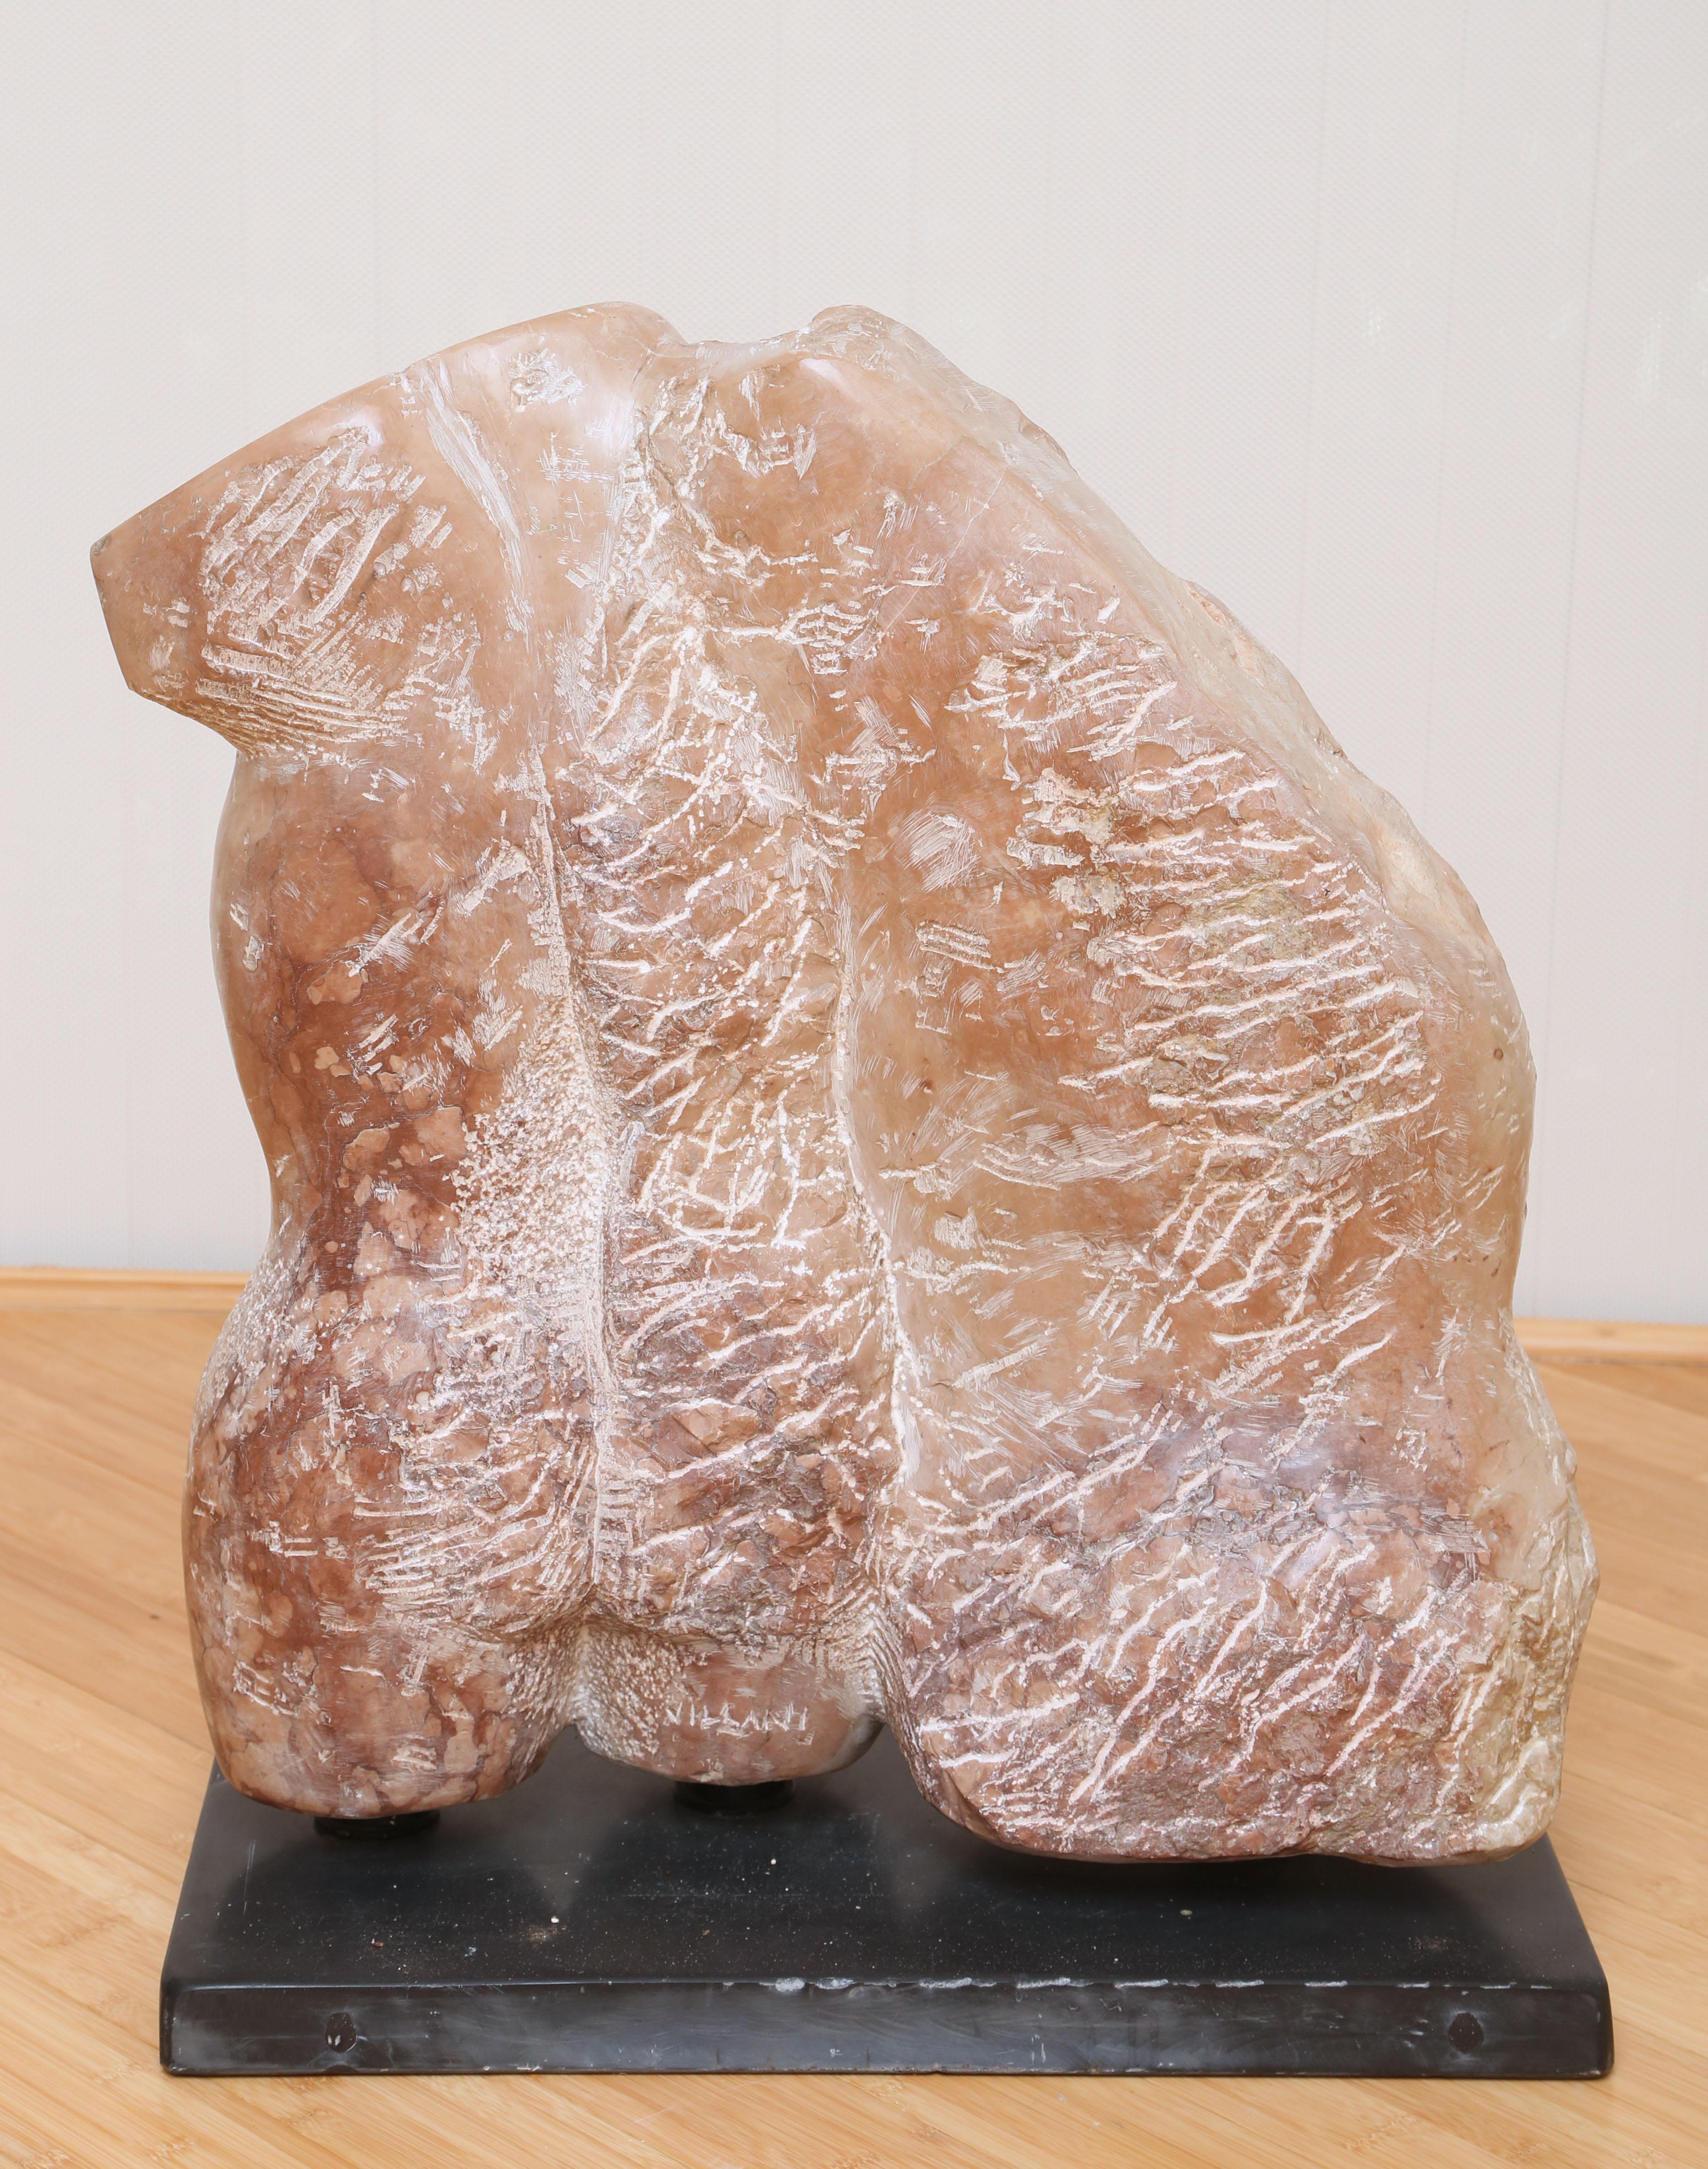 Beautiful hand-carved sculpture made of pink travertine with rough carving parts giving an impression of flesh.
Massimo Villani was born in Cecina (Li) in 1959. He studied at the Instituto d'arte in Voletrra and at the Accademia di Belle Arti in